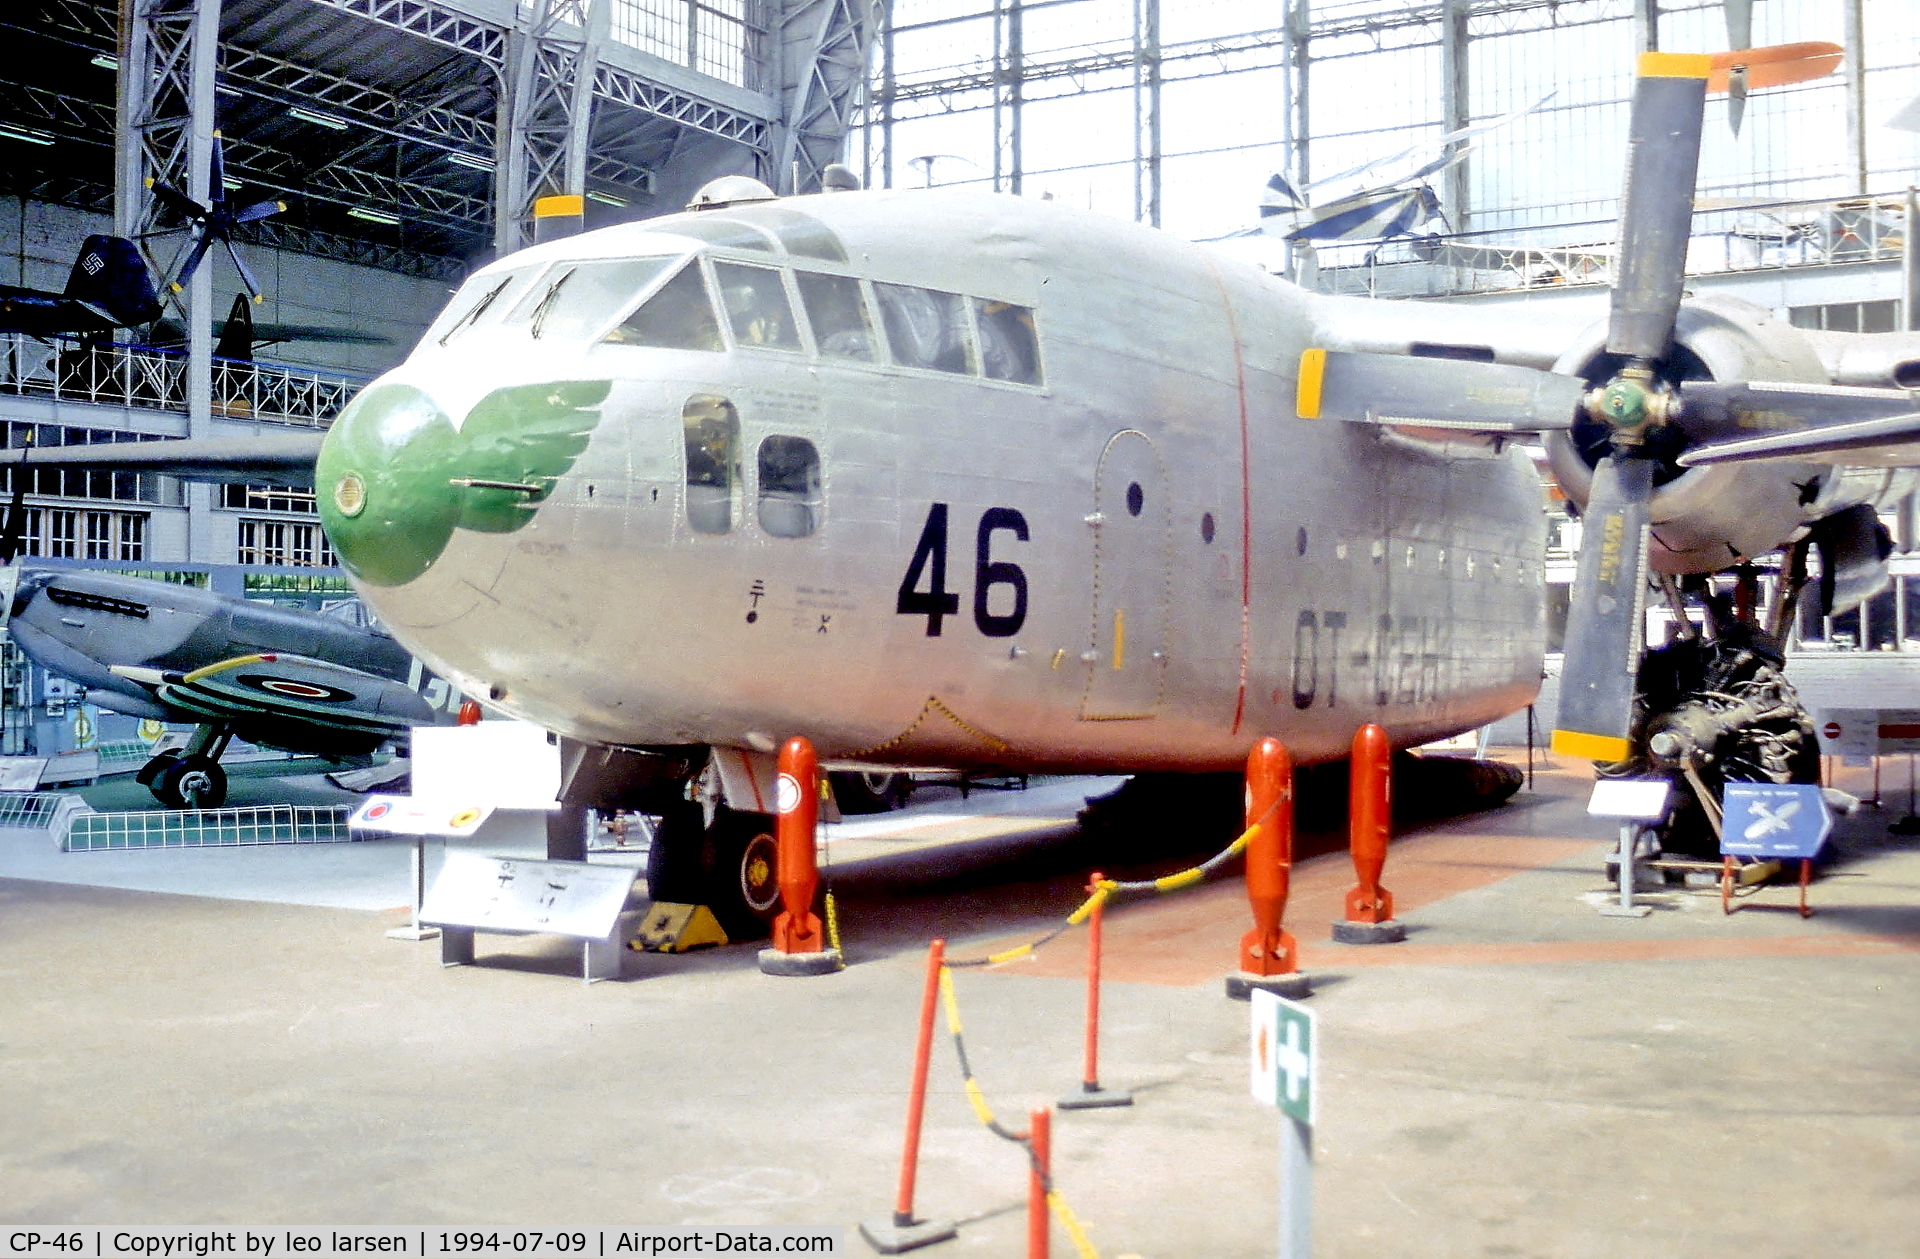 CP-46, 1953 Fairchild C-119G Flying Boxcar C/N 254, Brussels Air Museum 9.7.94